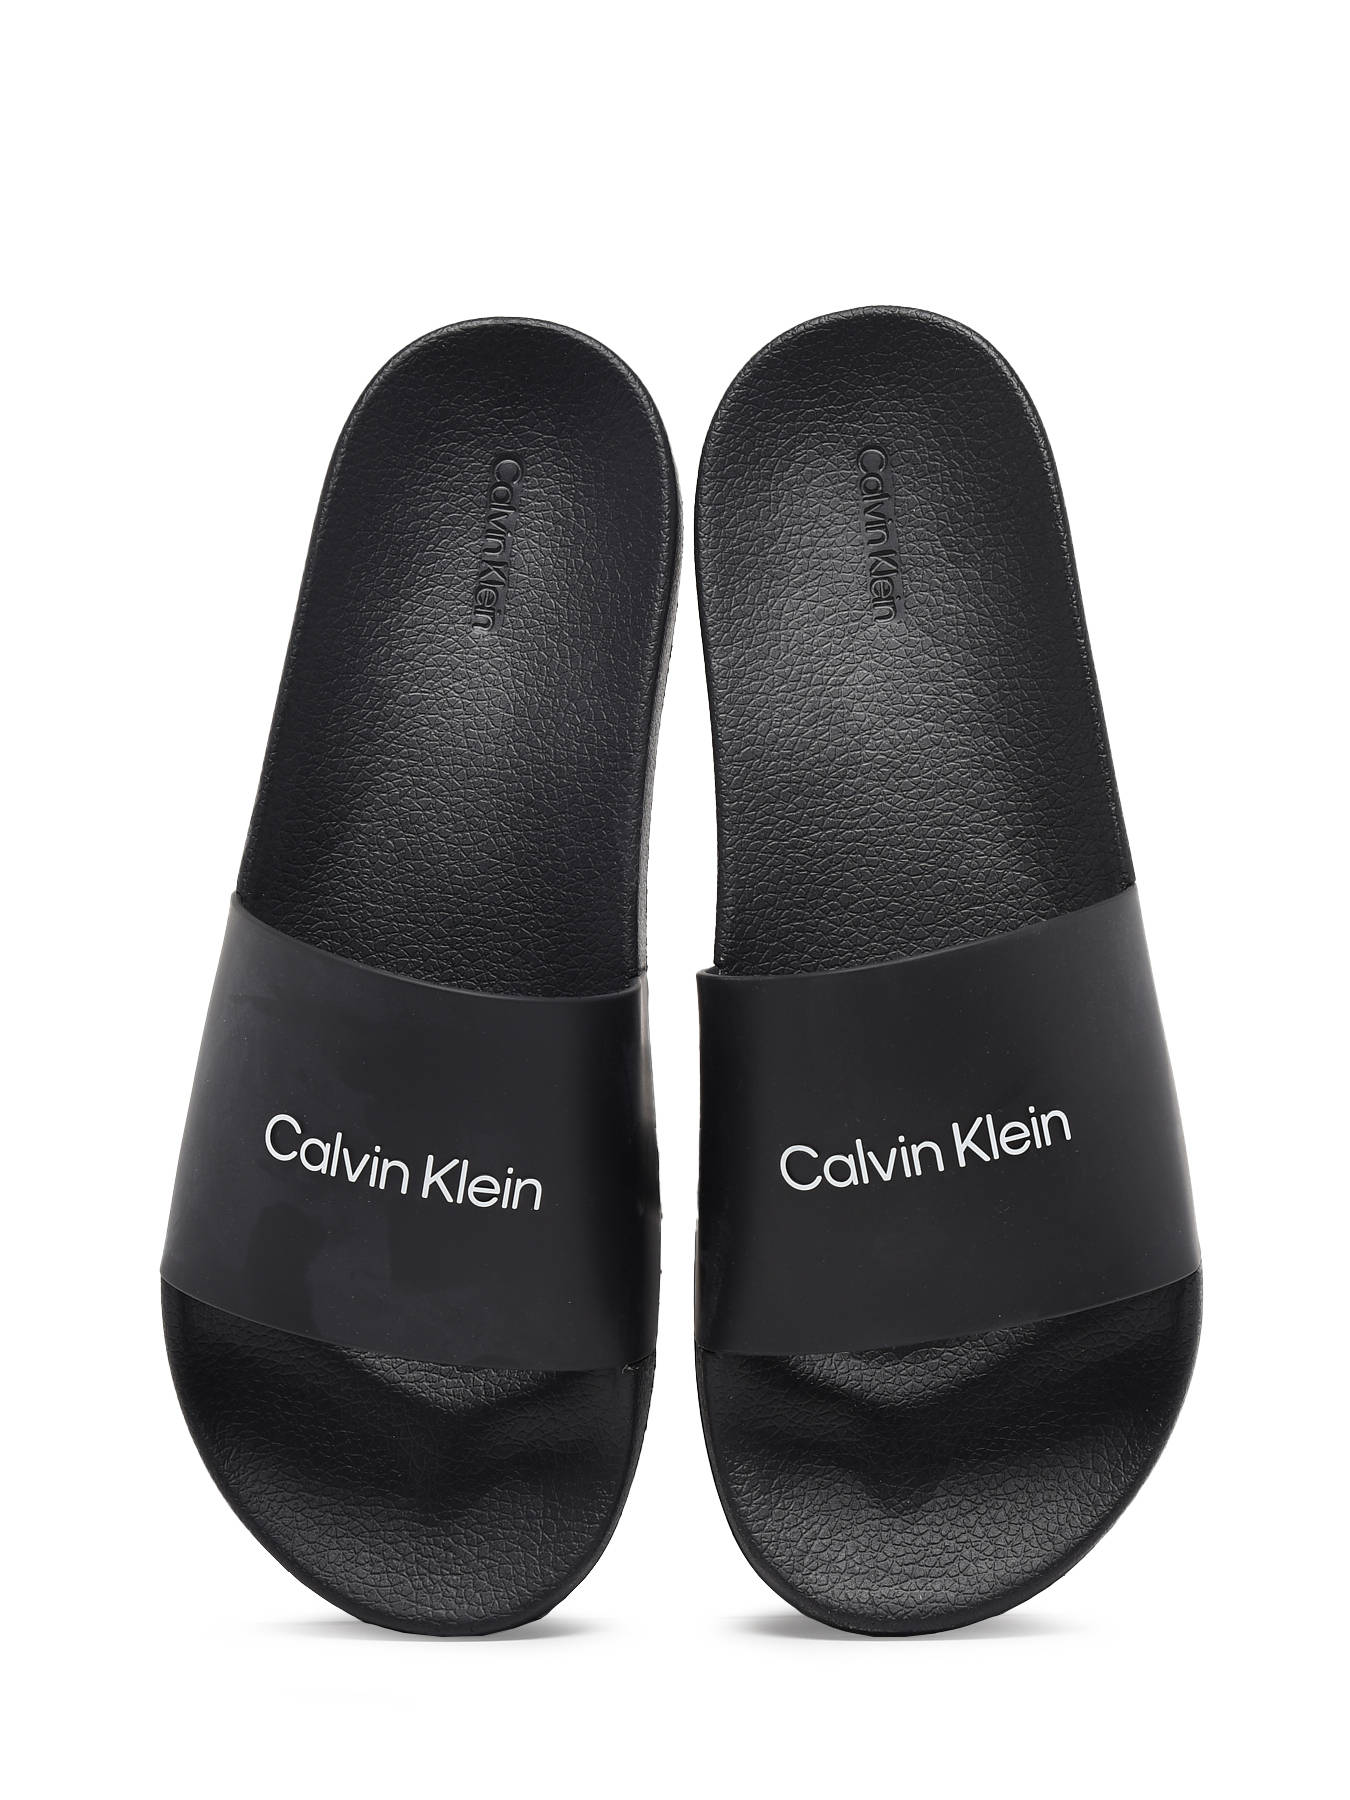 Calvin Klein Jeans Mules POOL SLIDE RUBBER - best prices